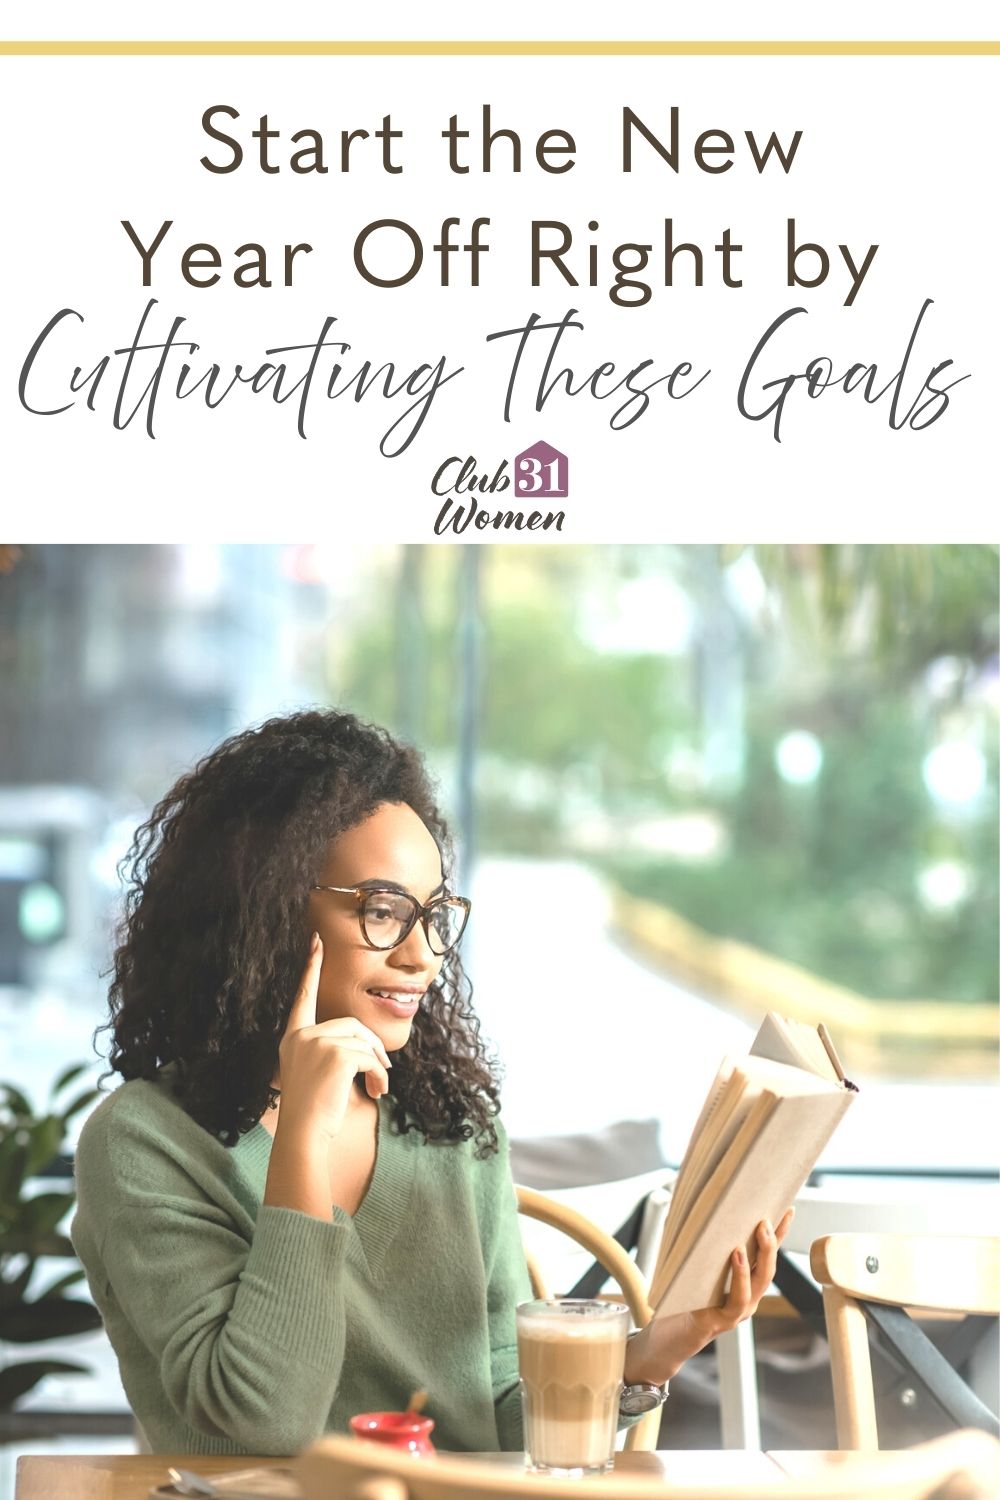 While some people think of the start of the new year as a time to take on new goals, we think of it as a time to dive into some new books via @Club31Women